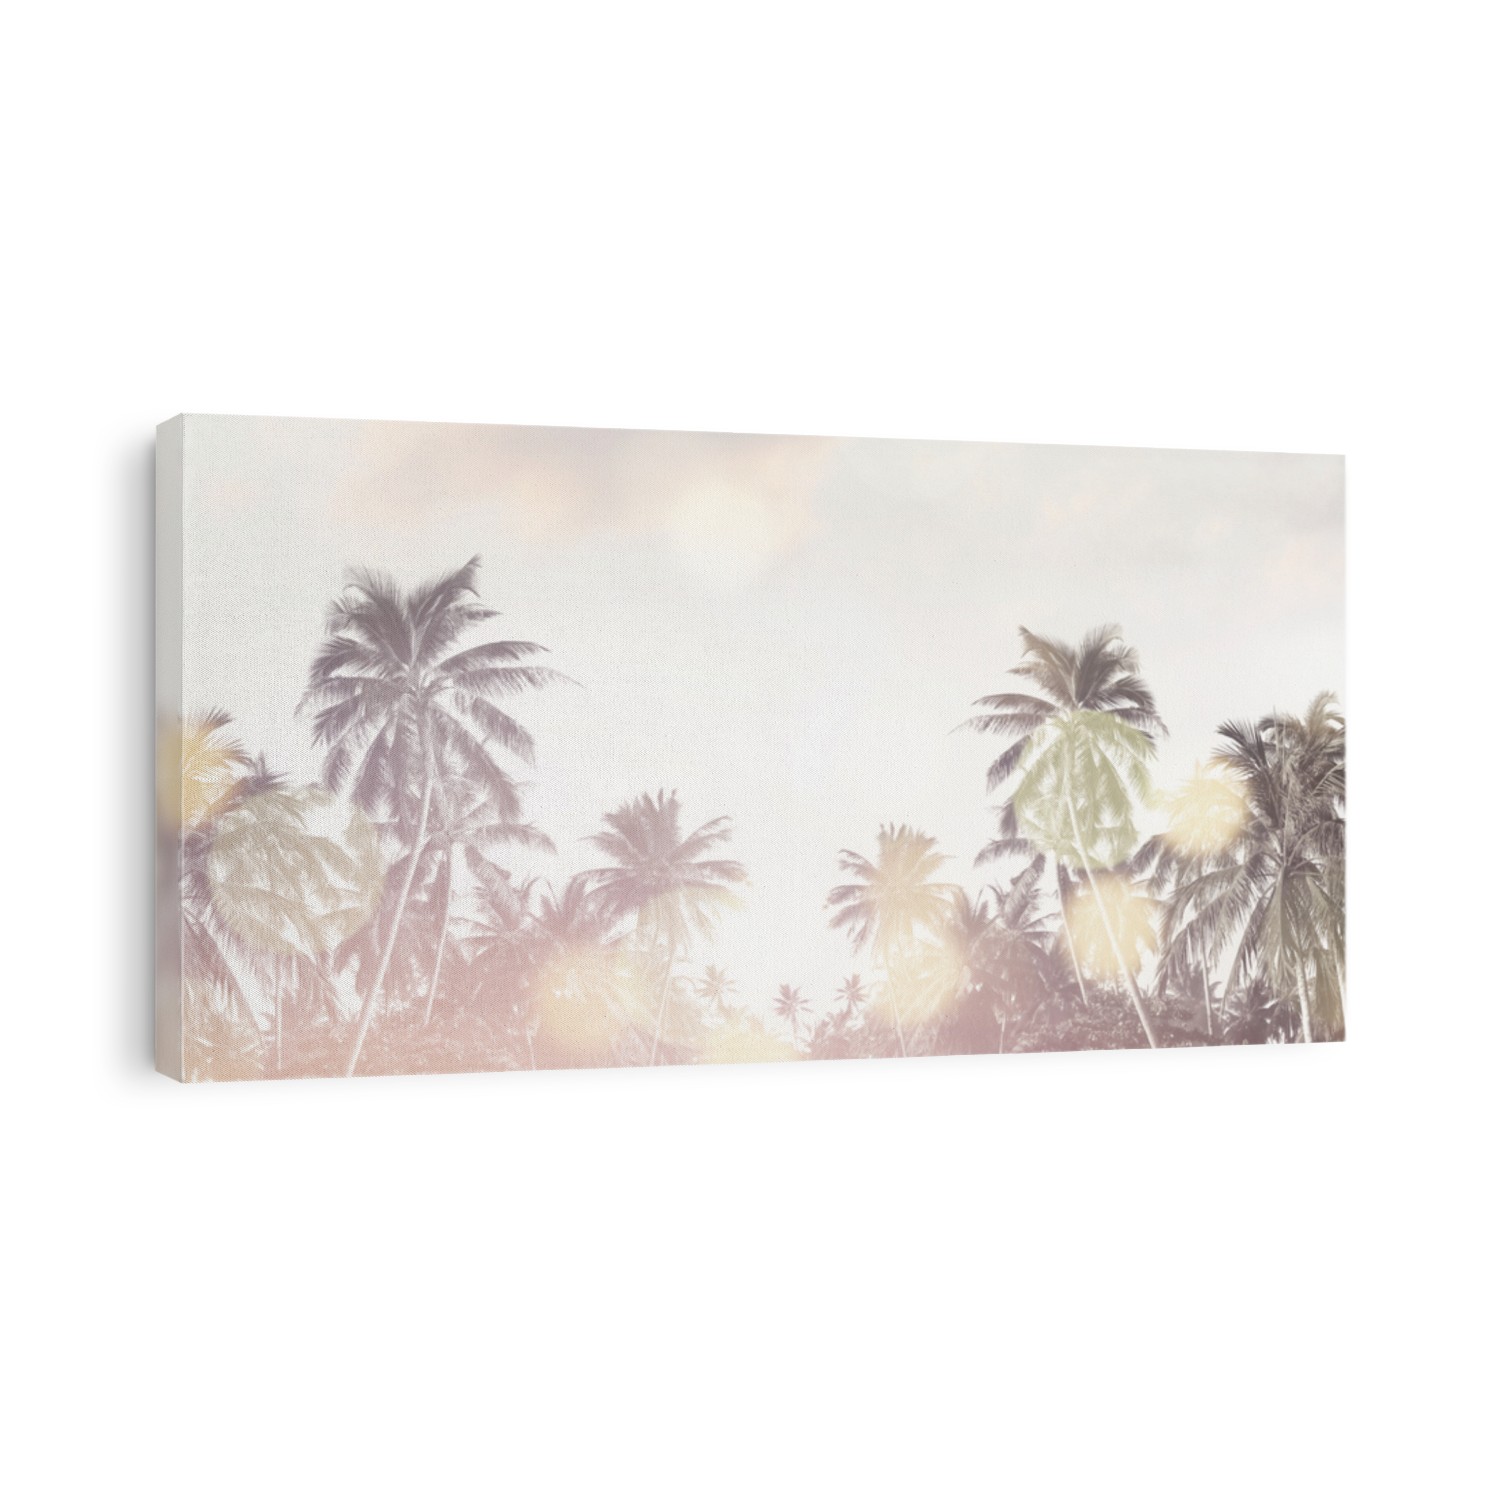 Tropical beach summer background with palm trees silhouette at sunset. Coconut palm trees at tropical coast with vintage effect. Bokeh effect. Panorama